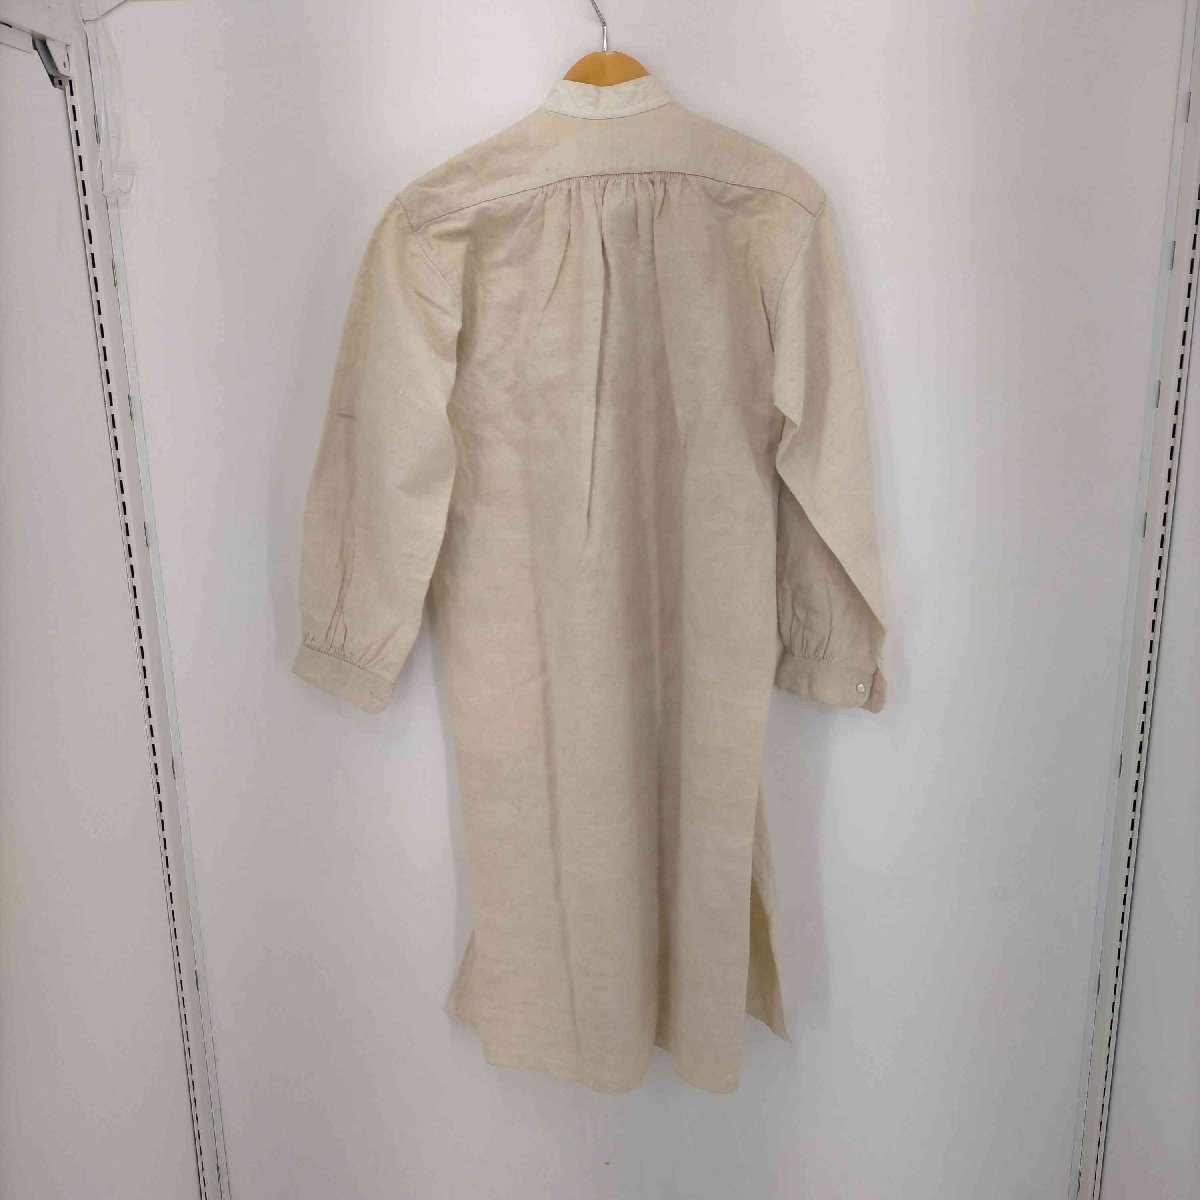 USED古着(ユーズドフルギ) 1900～20S France Antique linen Smock ア 中古 古着 0230の画像2